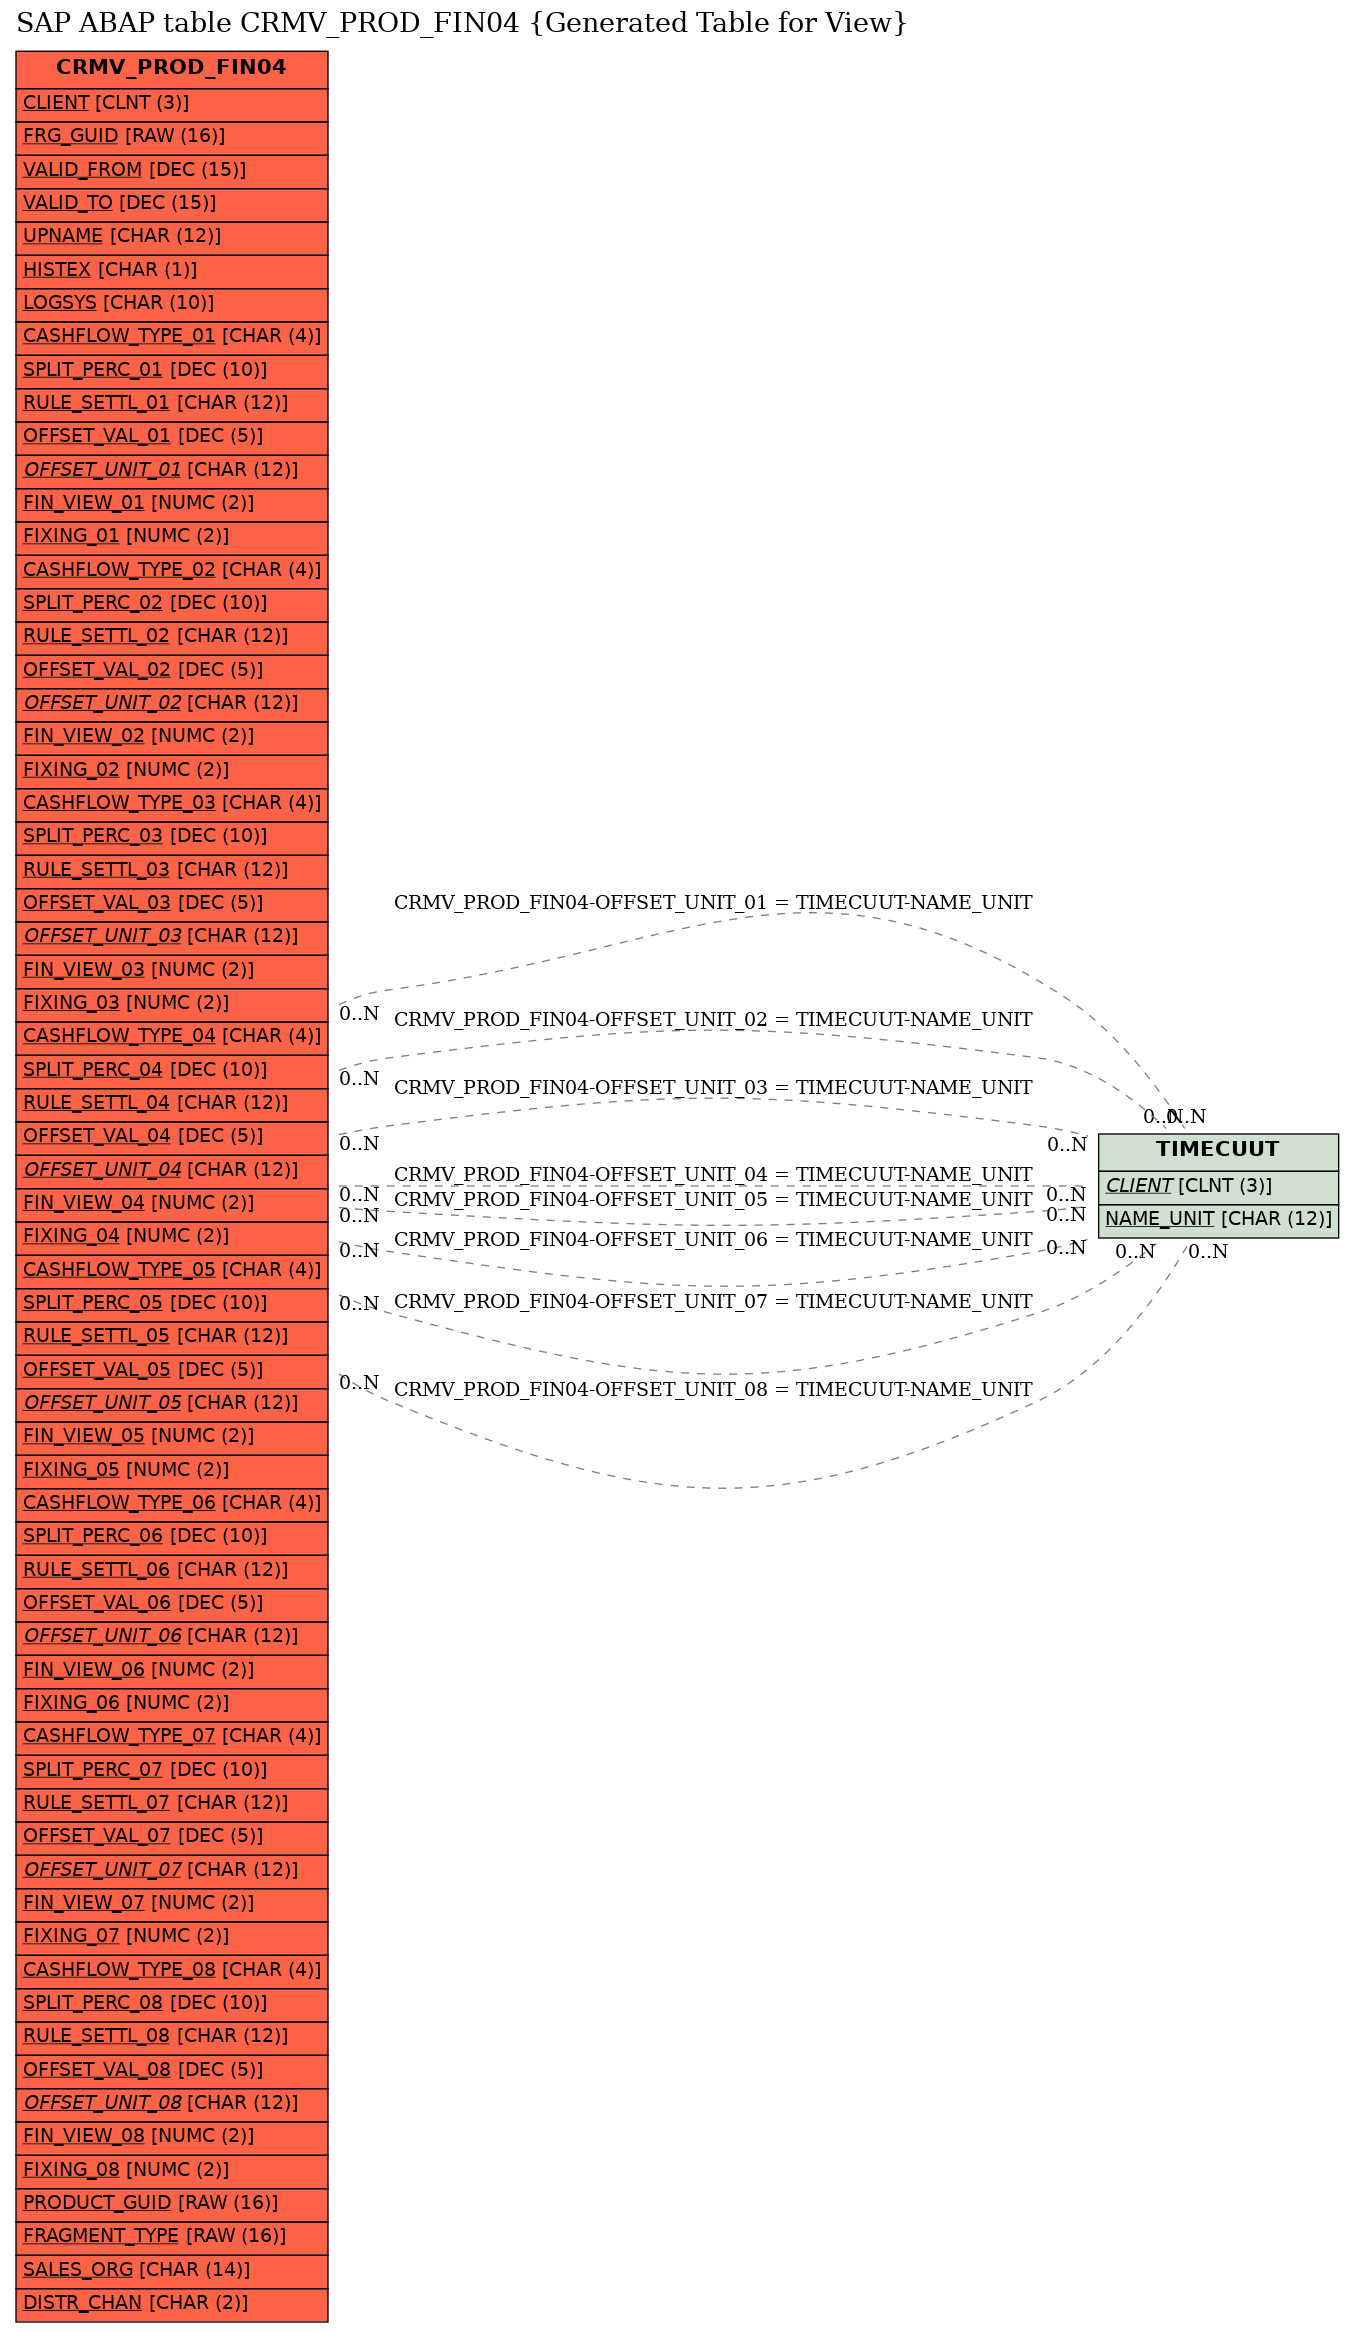 E-R Diagram for table CRMV_PROD_FIN04 (Generated Table for View)